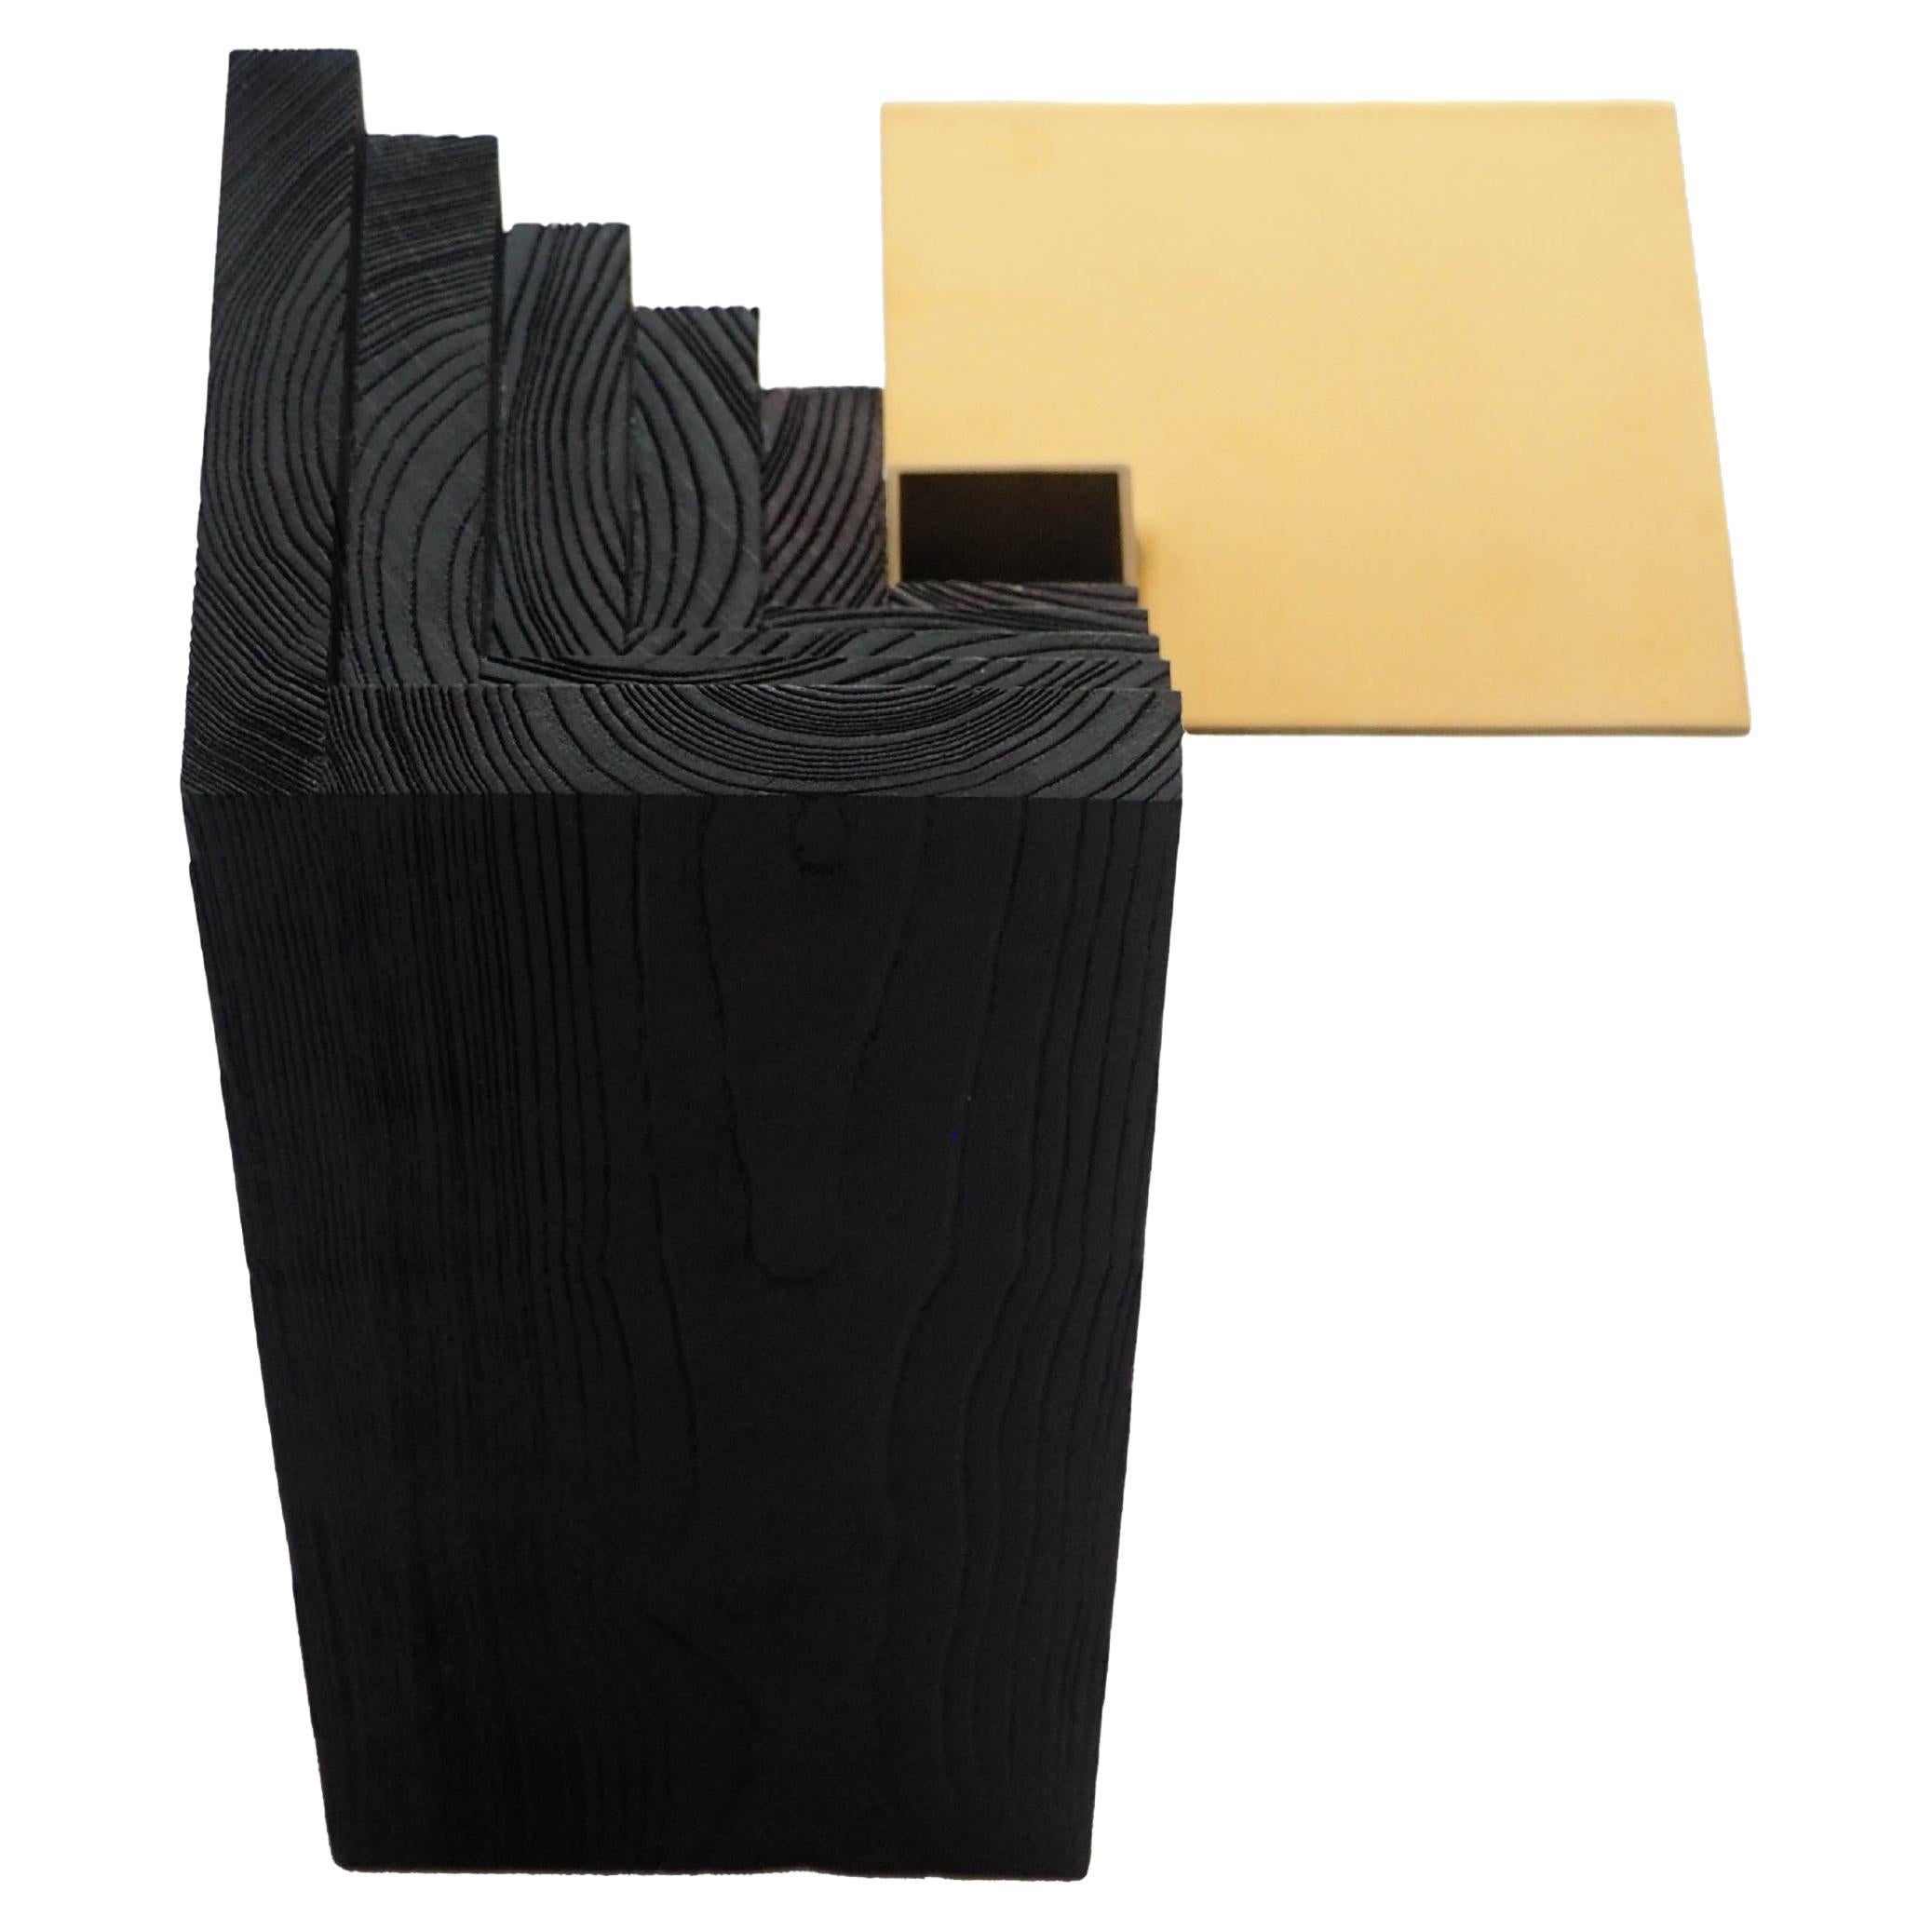 Packaging size and kg: 32cm x 32cm x 42 cm, approx. 8kg

A contrasting structure of solids and voids, an optical illusion that makes you lose sense of what stands further. In plan the wood and the mirrored brass surface form two identical squares